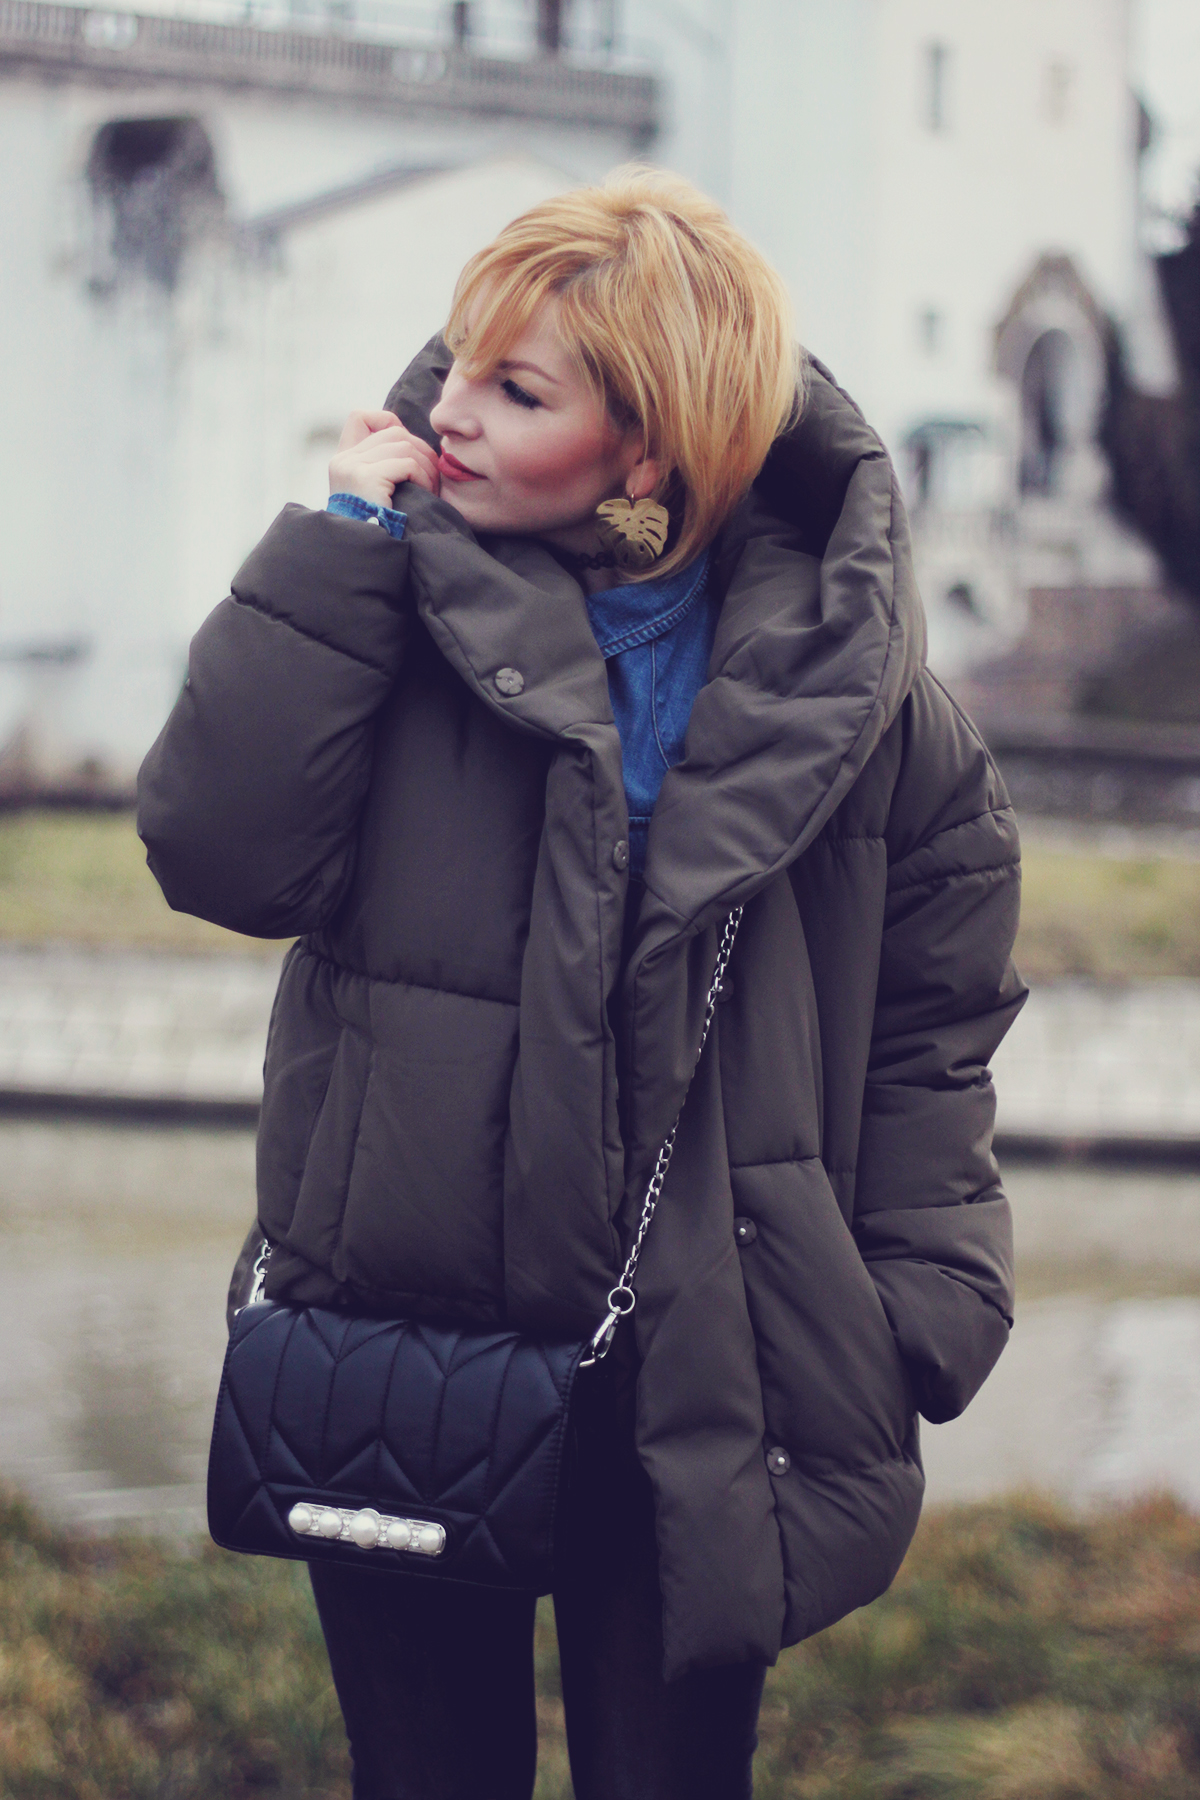 winter fashion, padded jacket, chevron bag with pearl detailing, jeans, matte make-up, leaf earrings, choker